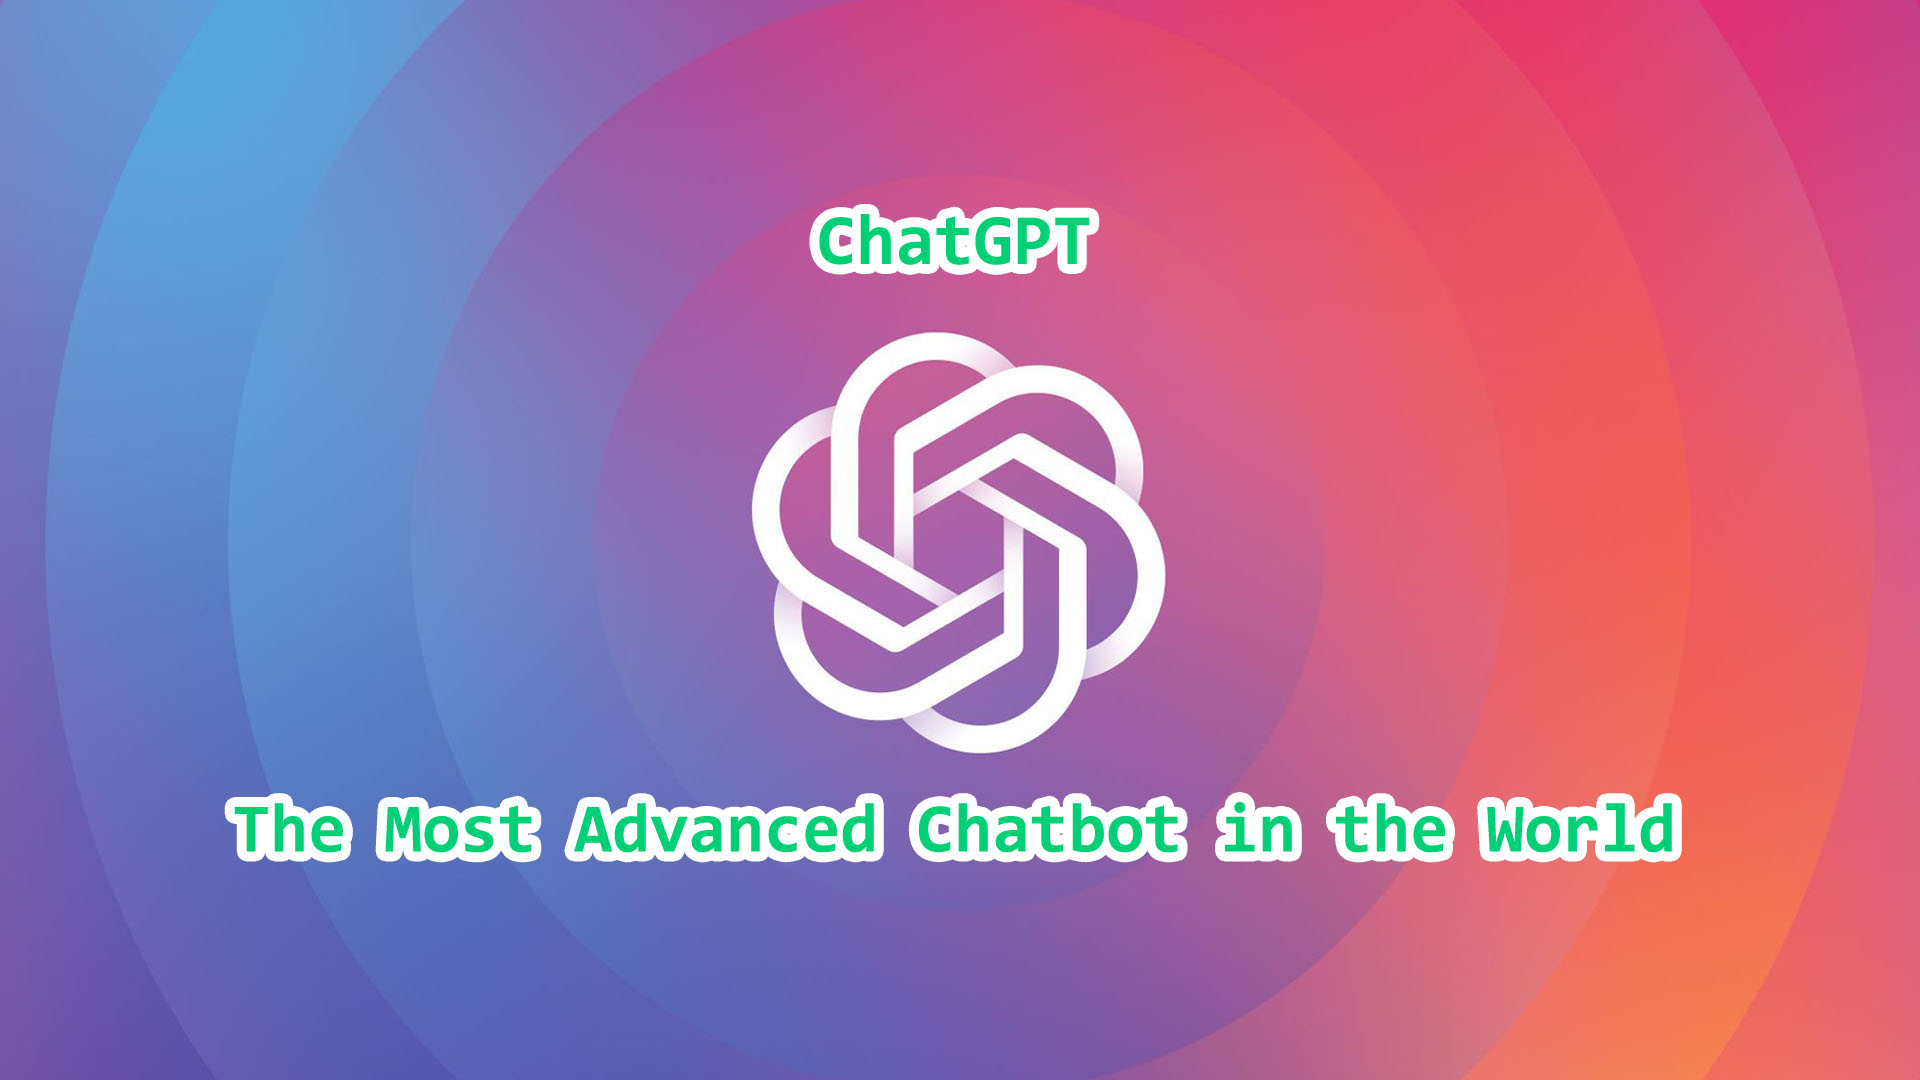 ChatGPT - The Most Advanced Chatbot in the World